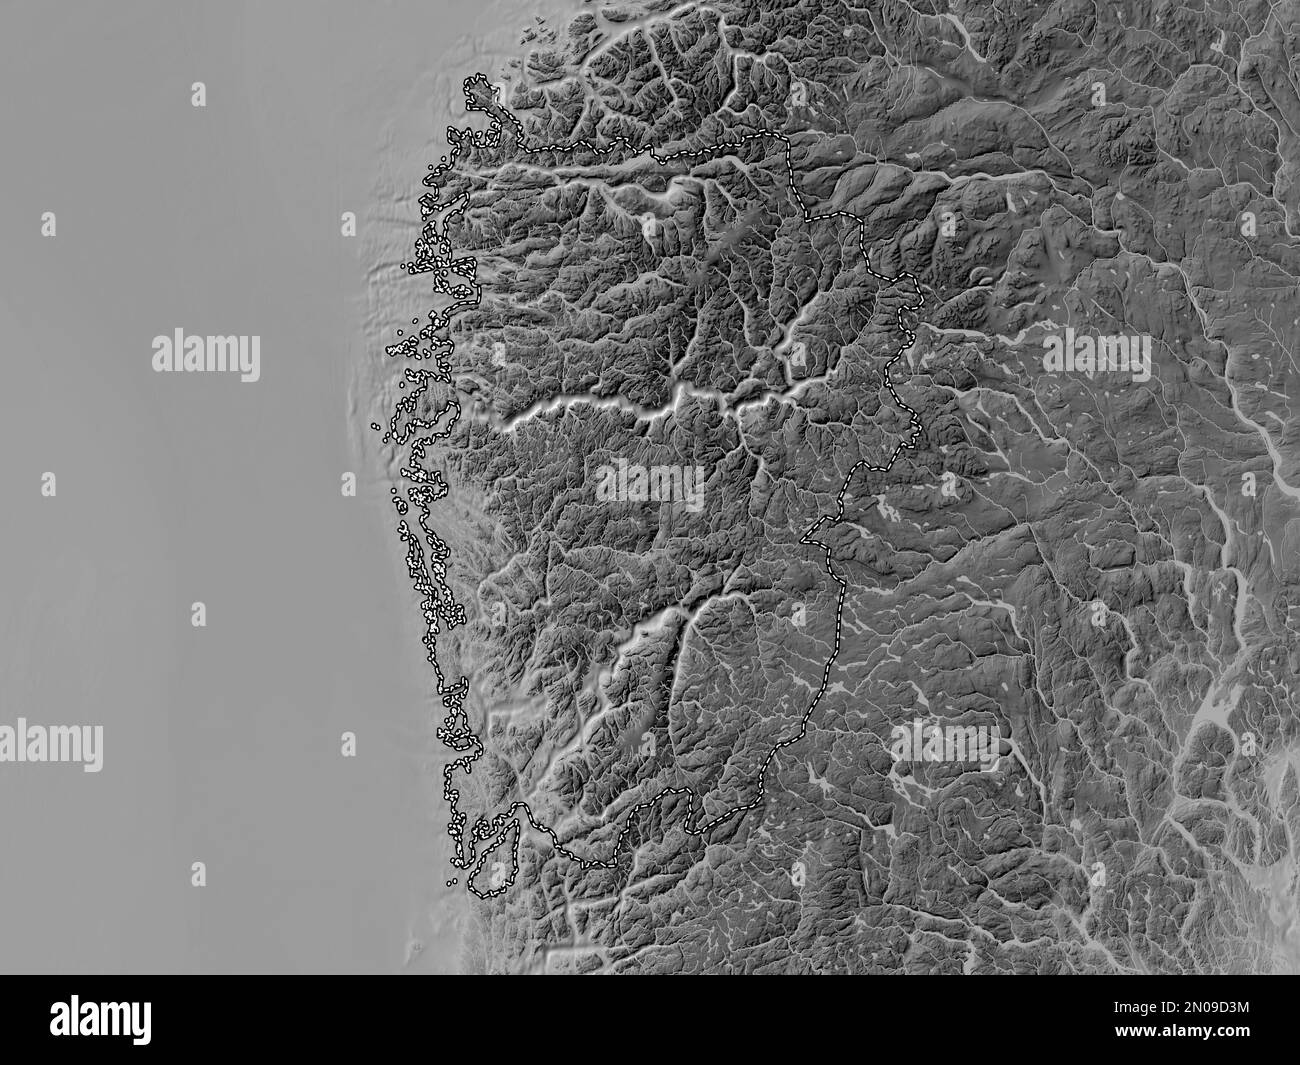 Vestland, county of Norway. Grayscale elevation map with lakes and rivers Stock Photo